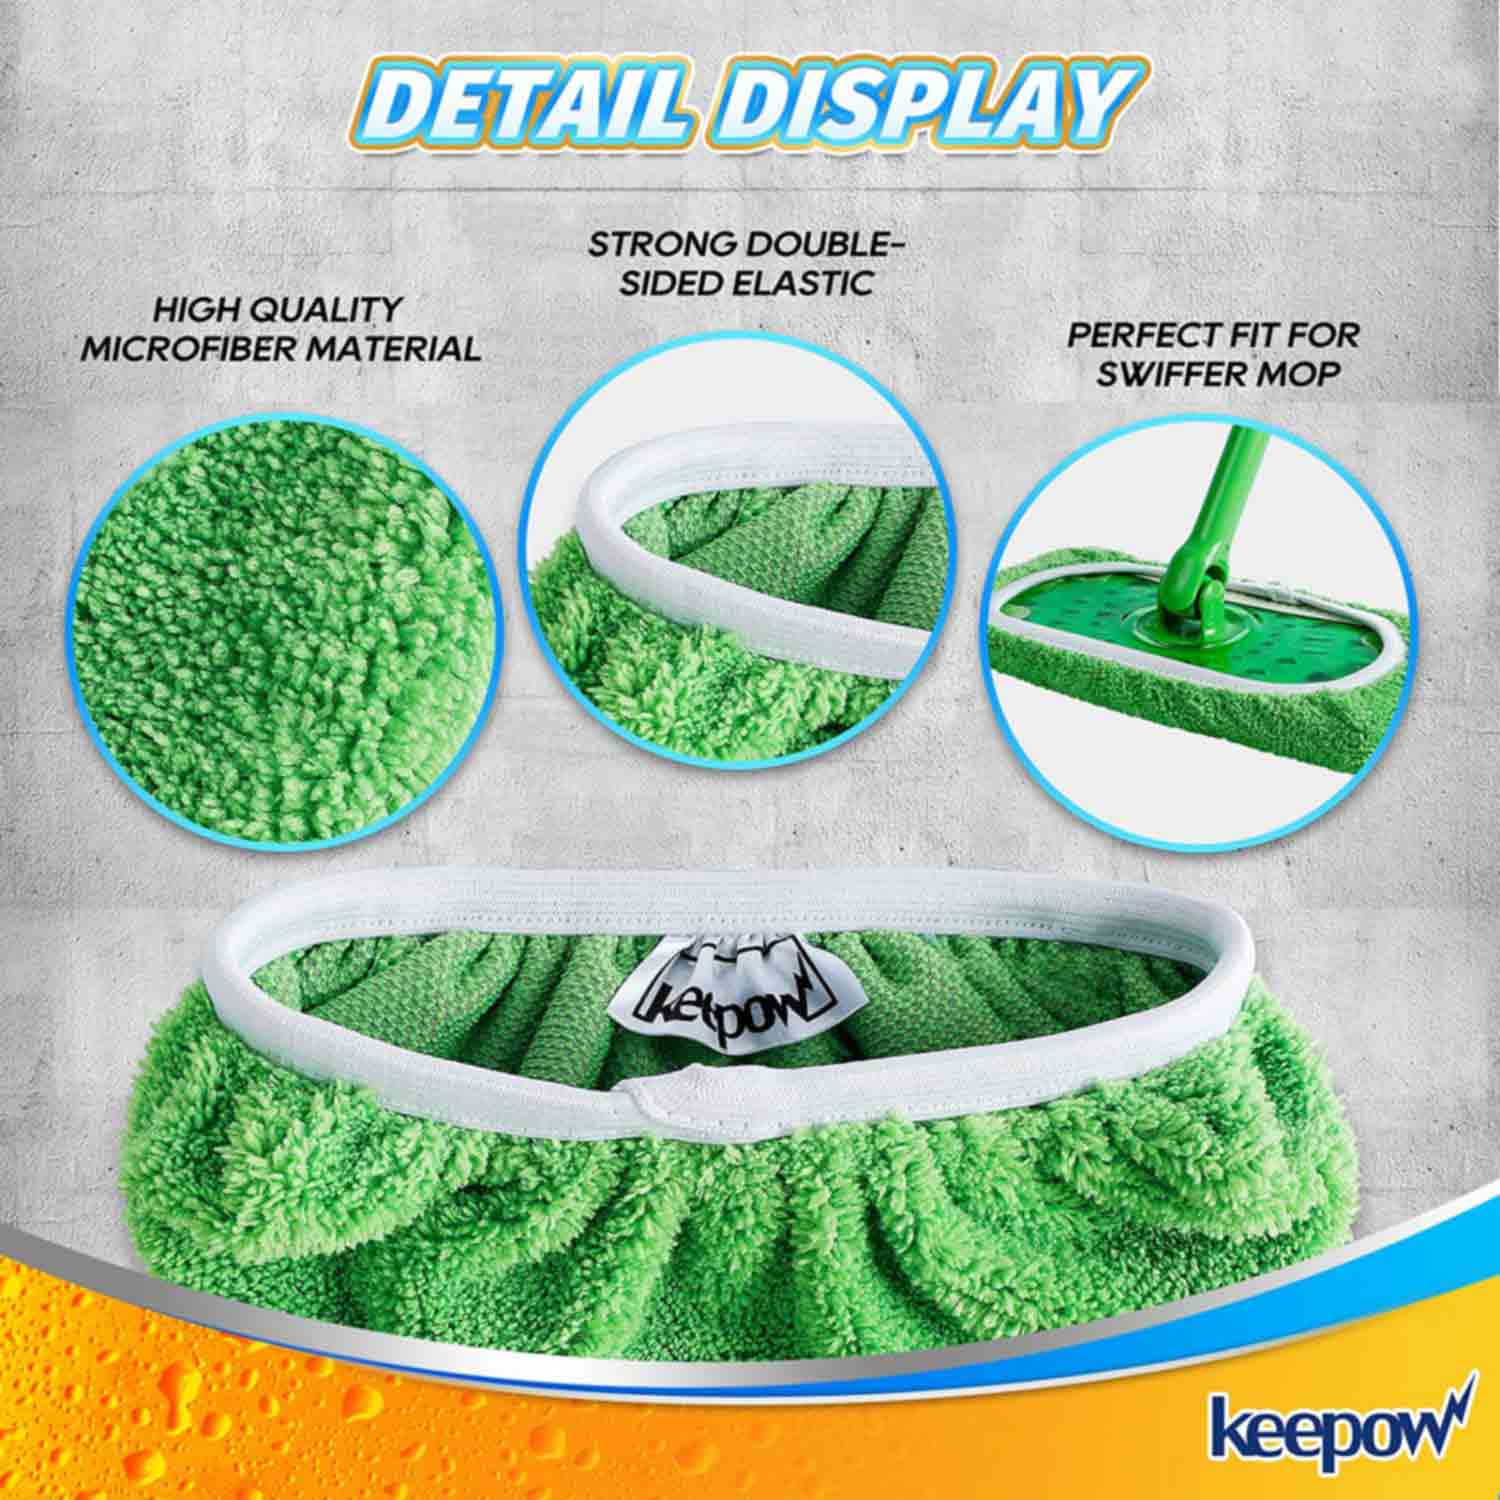 Keepow Dry Sweeping Cloths, Washable Microfiber Wet Mopping Cloths for Hardwood Floor Cleaning